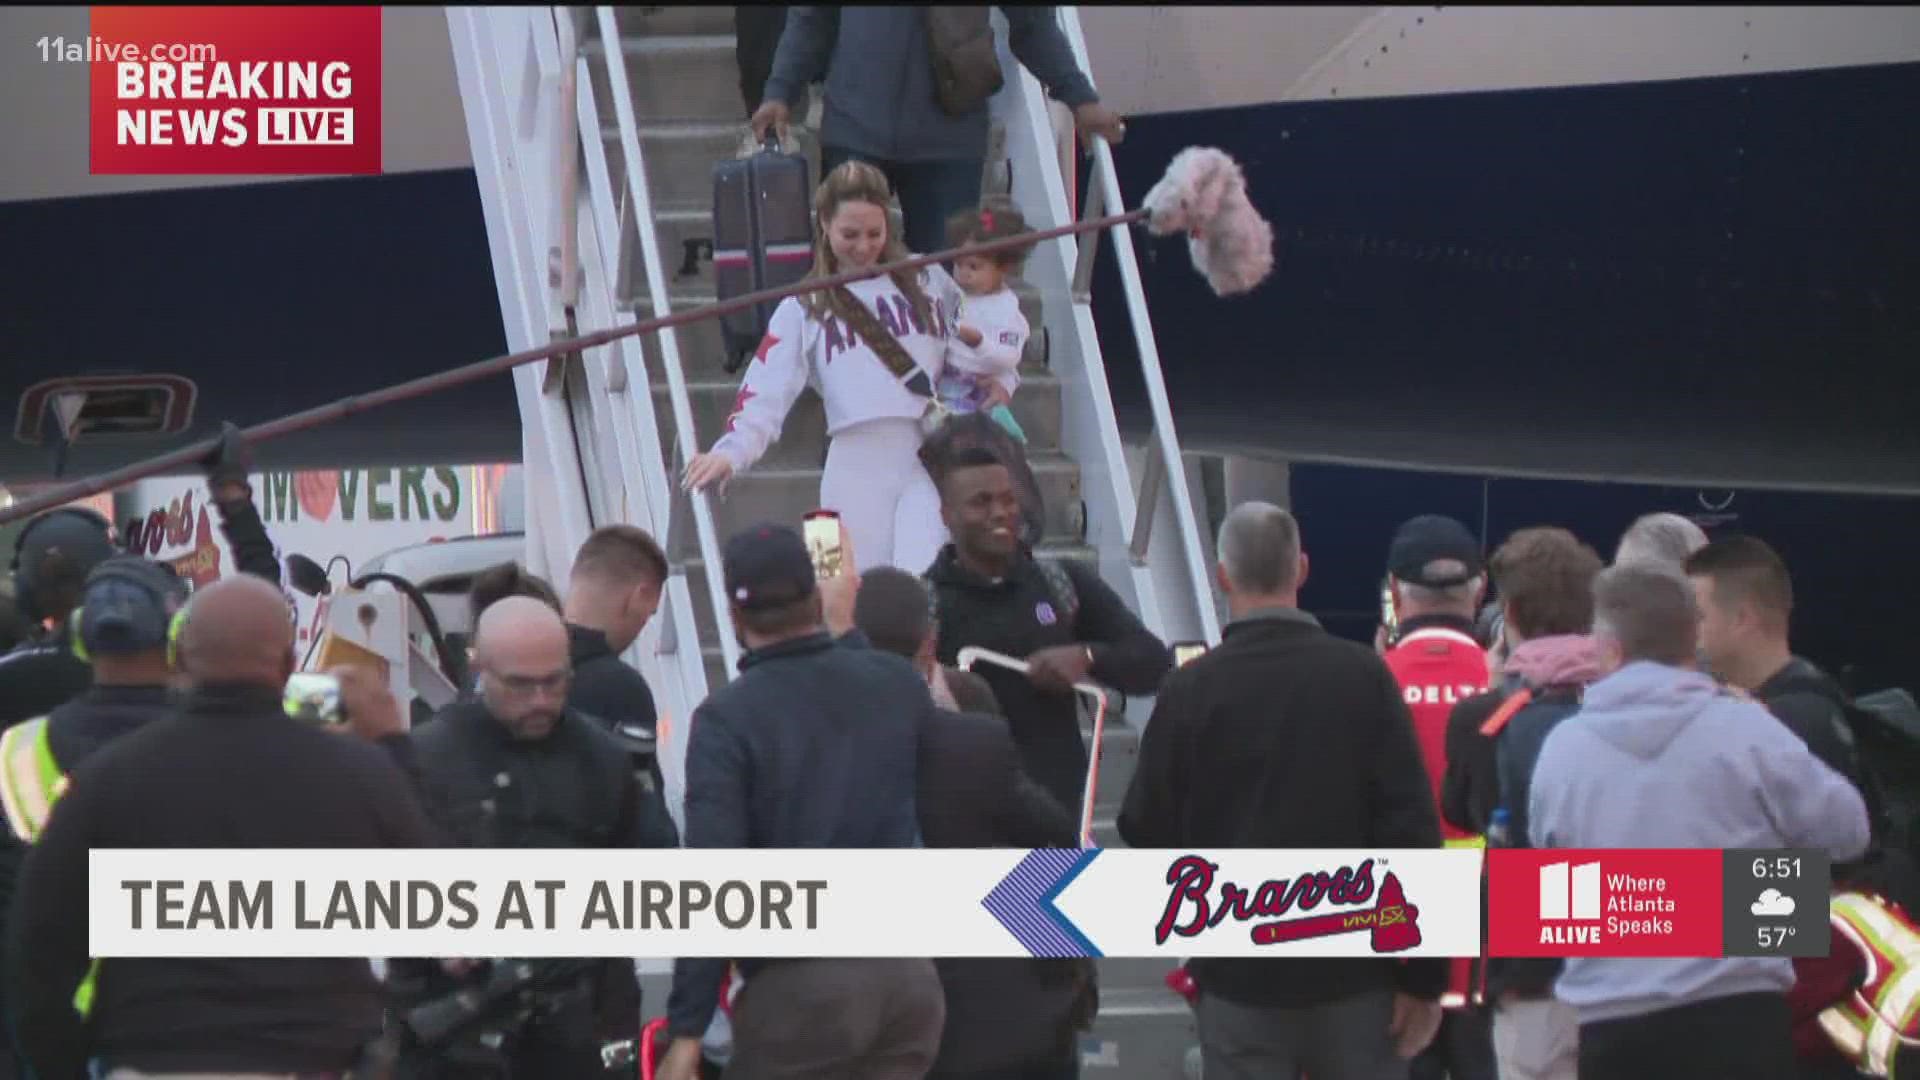 MVP Jorge Soler and family arrive in Atlanta after Braves win World Series